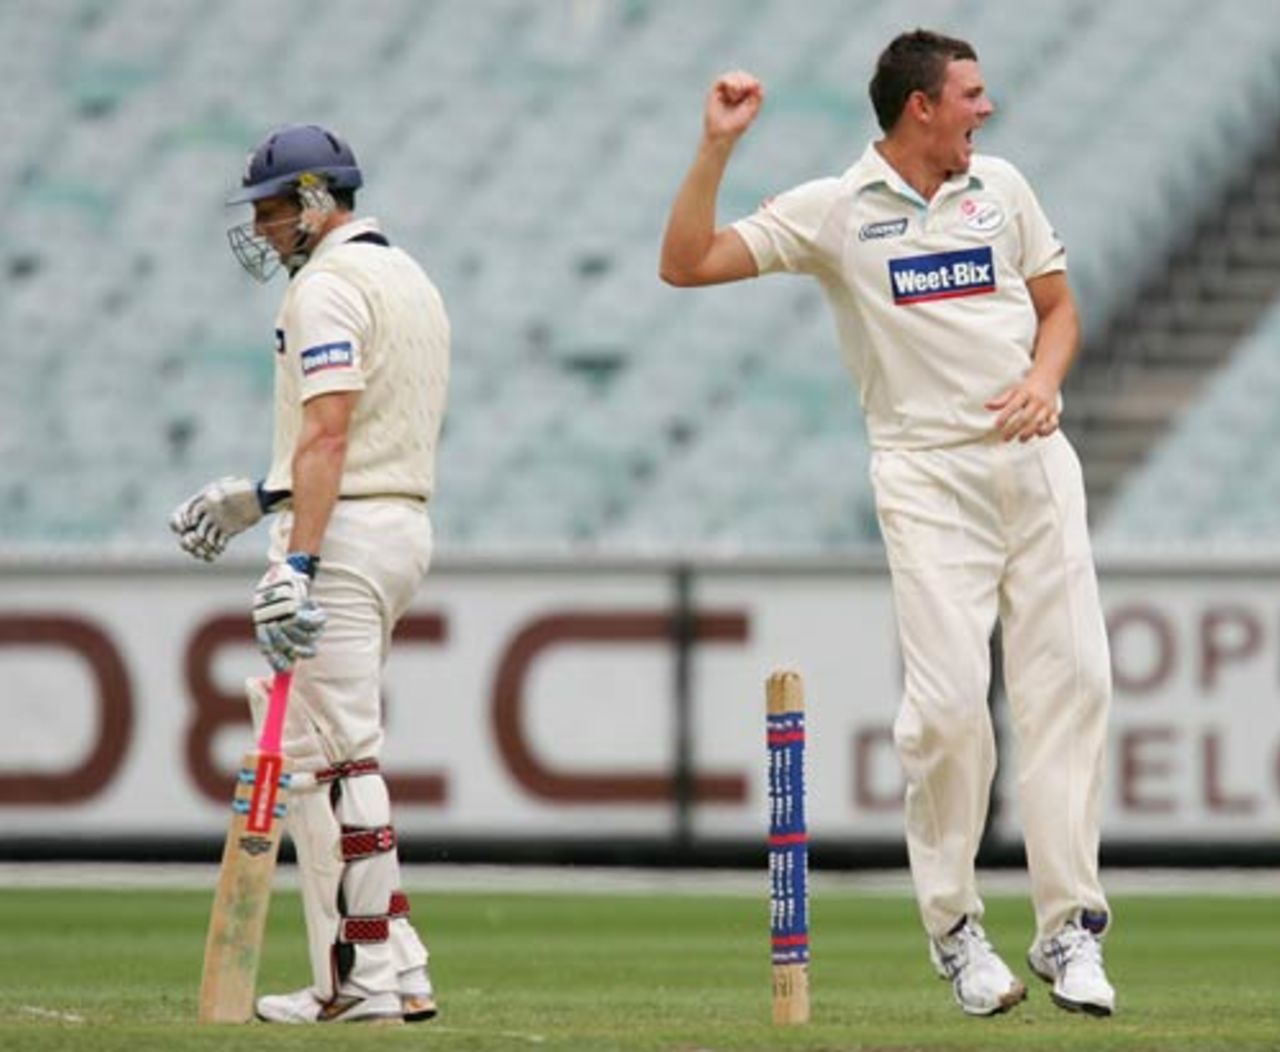 Josh Hazlewood celebrates the wicket of David Hussey, Victoria v New South Wales, Sheffield Shield, Melbourne, 2nd day, February 13, 2010